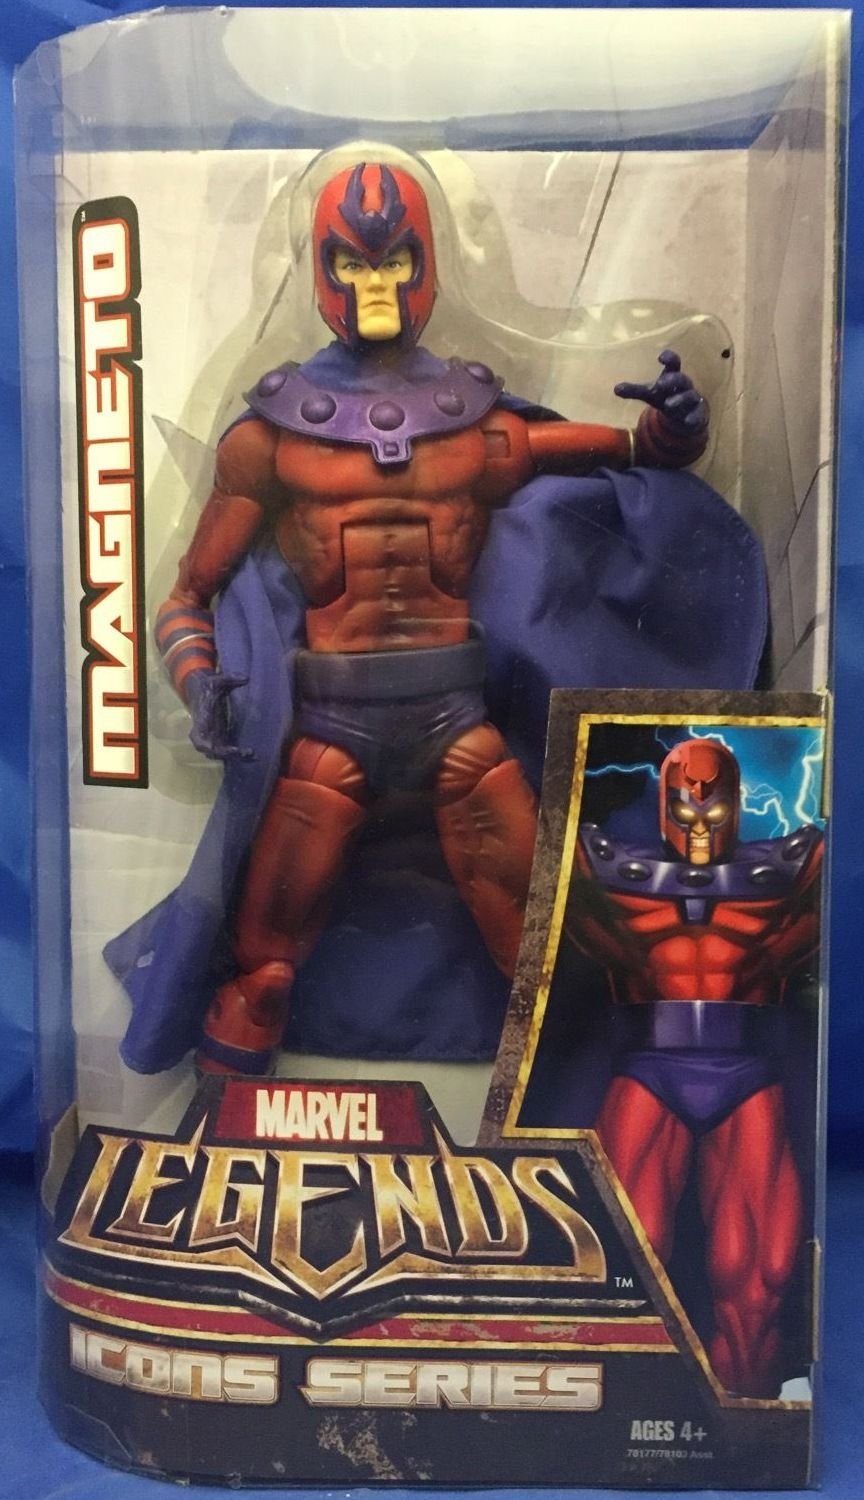 MARVEL LEGENDS ICONS SERIES 12 INCH ACTION FIGURE